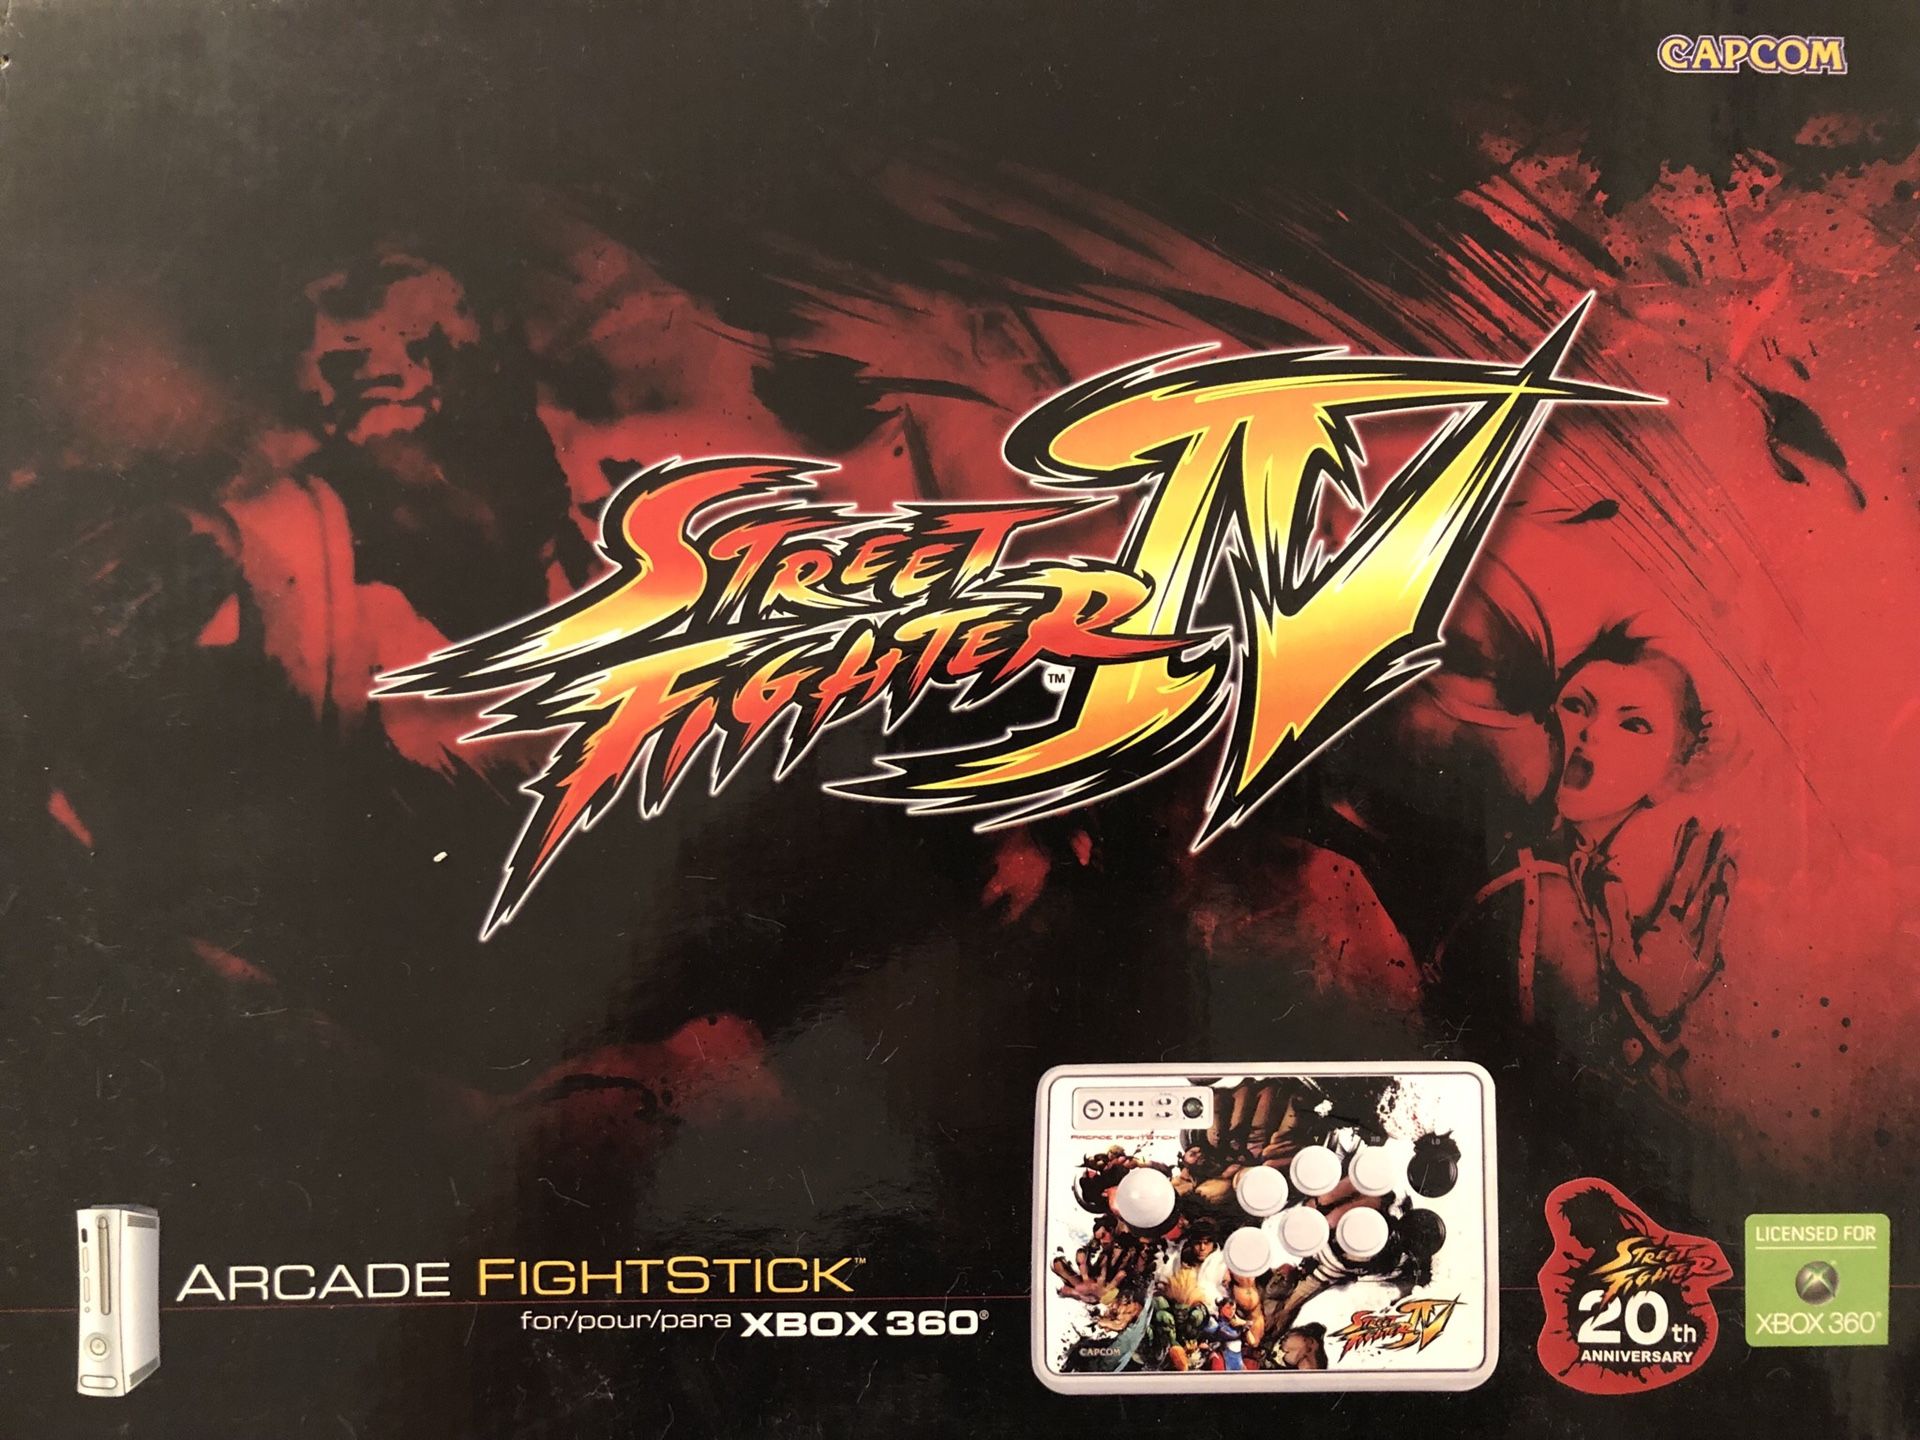 Street Fighter IV Arcade Fightstick + Game - Xbox 360